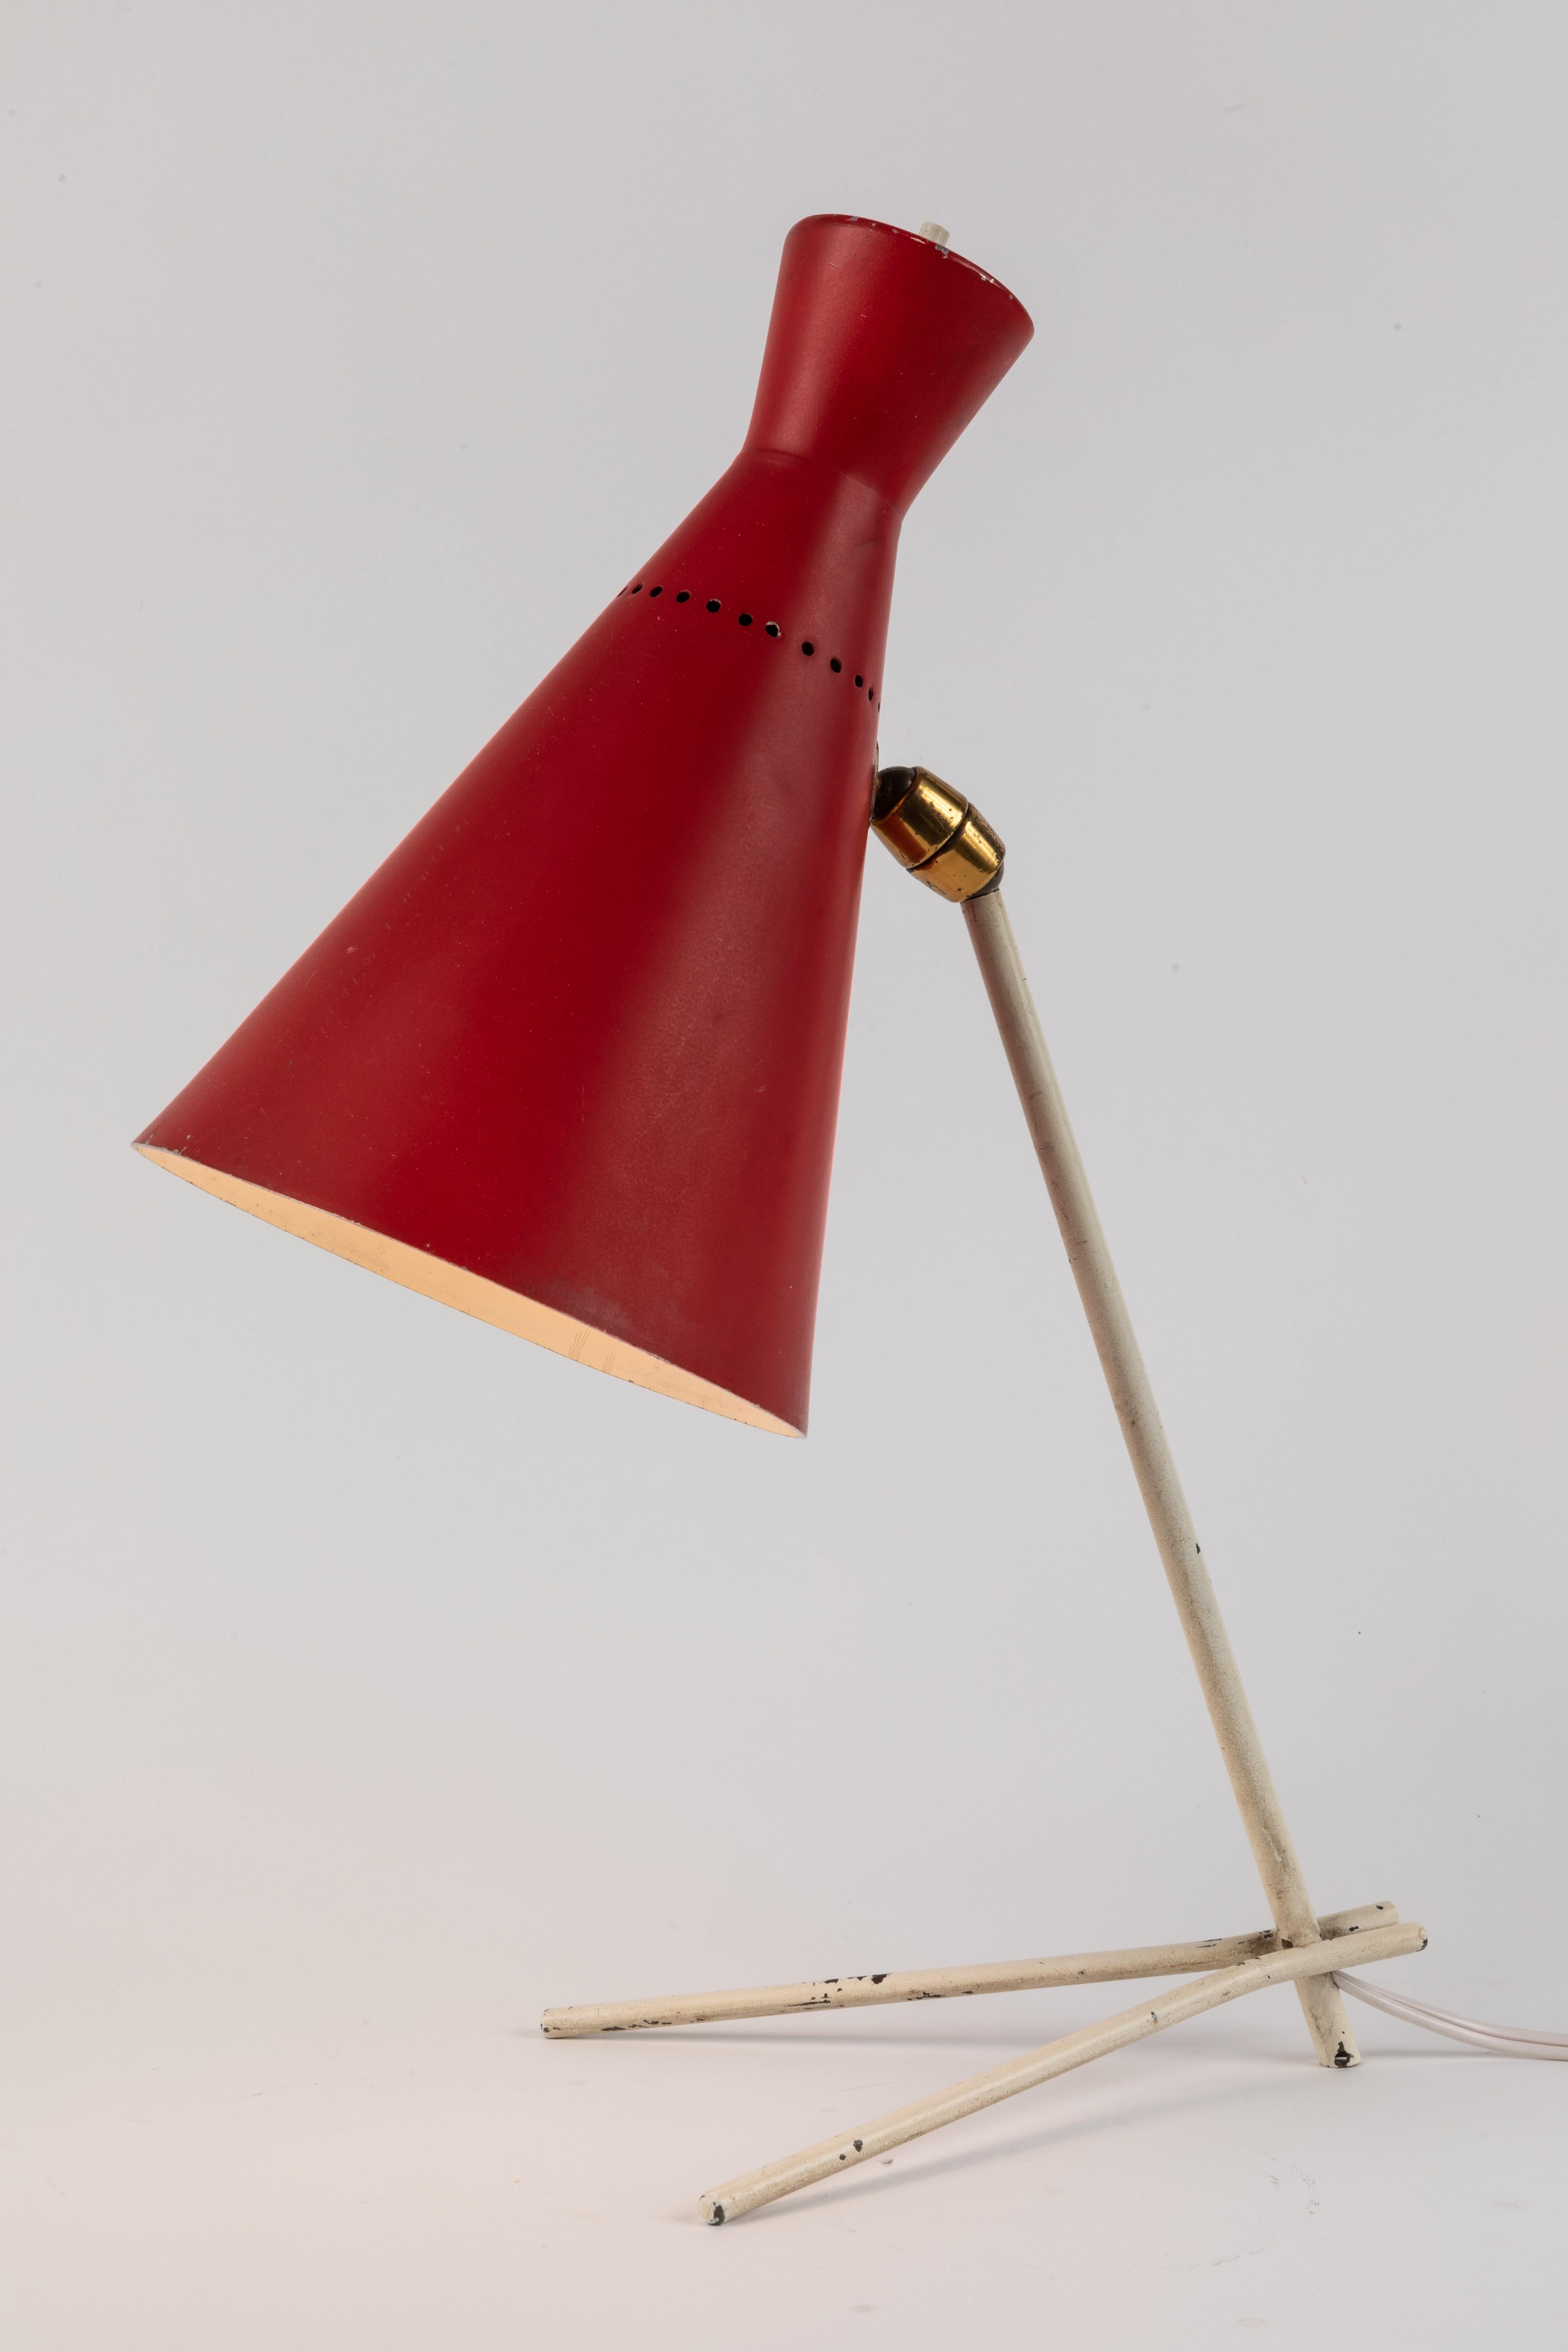 1950s Stilux Milano red and white table lamp. This extremely rare and iconic design is executed in red and white painted metal with original color in very good vintage condition. Shade adjustable at two points for a flexible variety of lighting